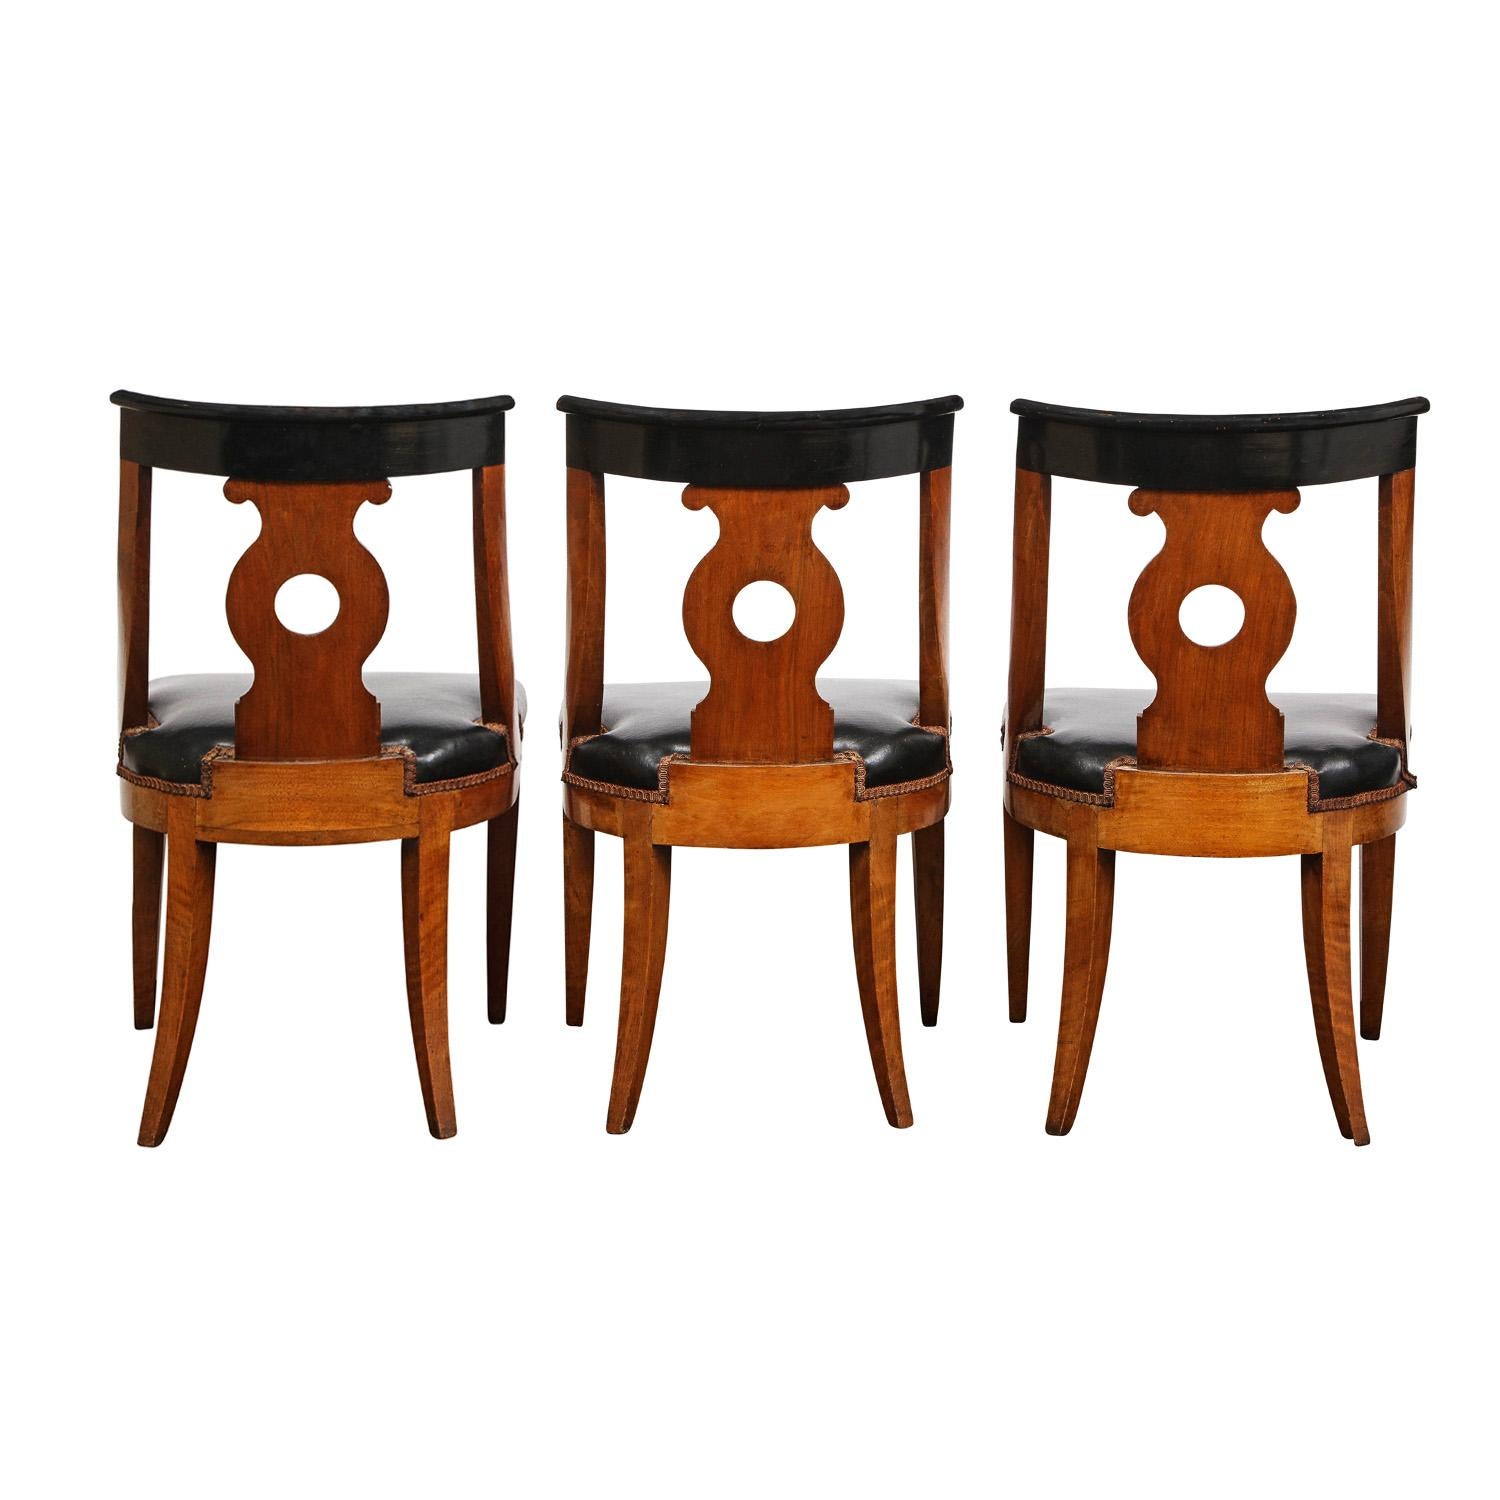 Mid-20th Century Set of 6 Chic Neoclassical Dining Chairs, 1940s